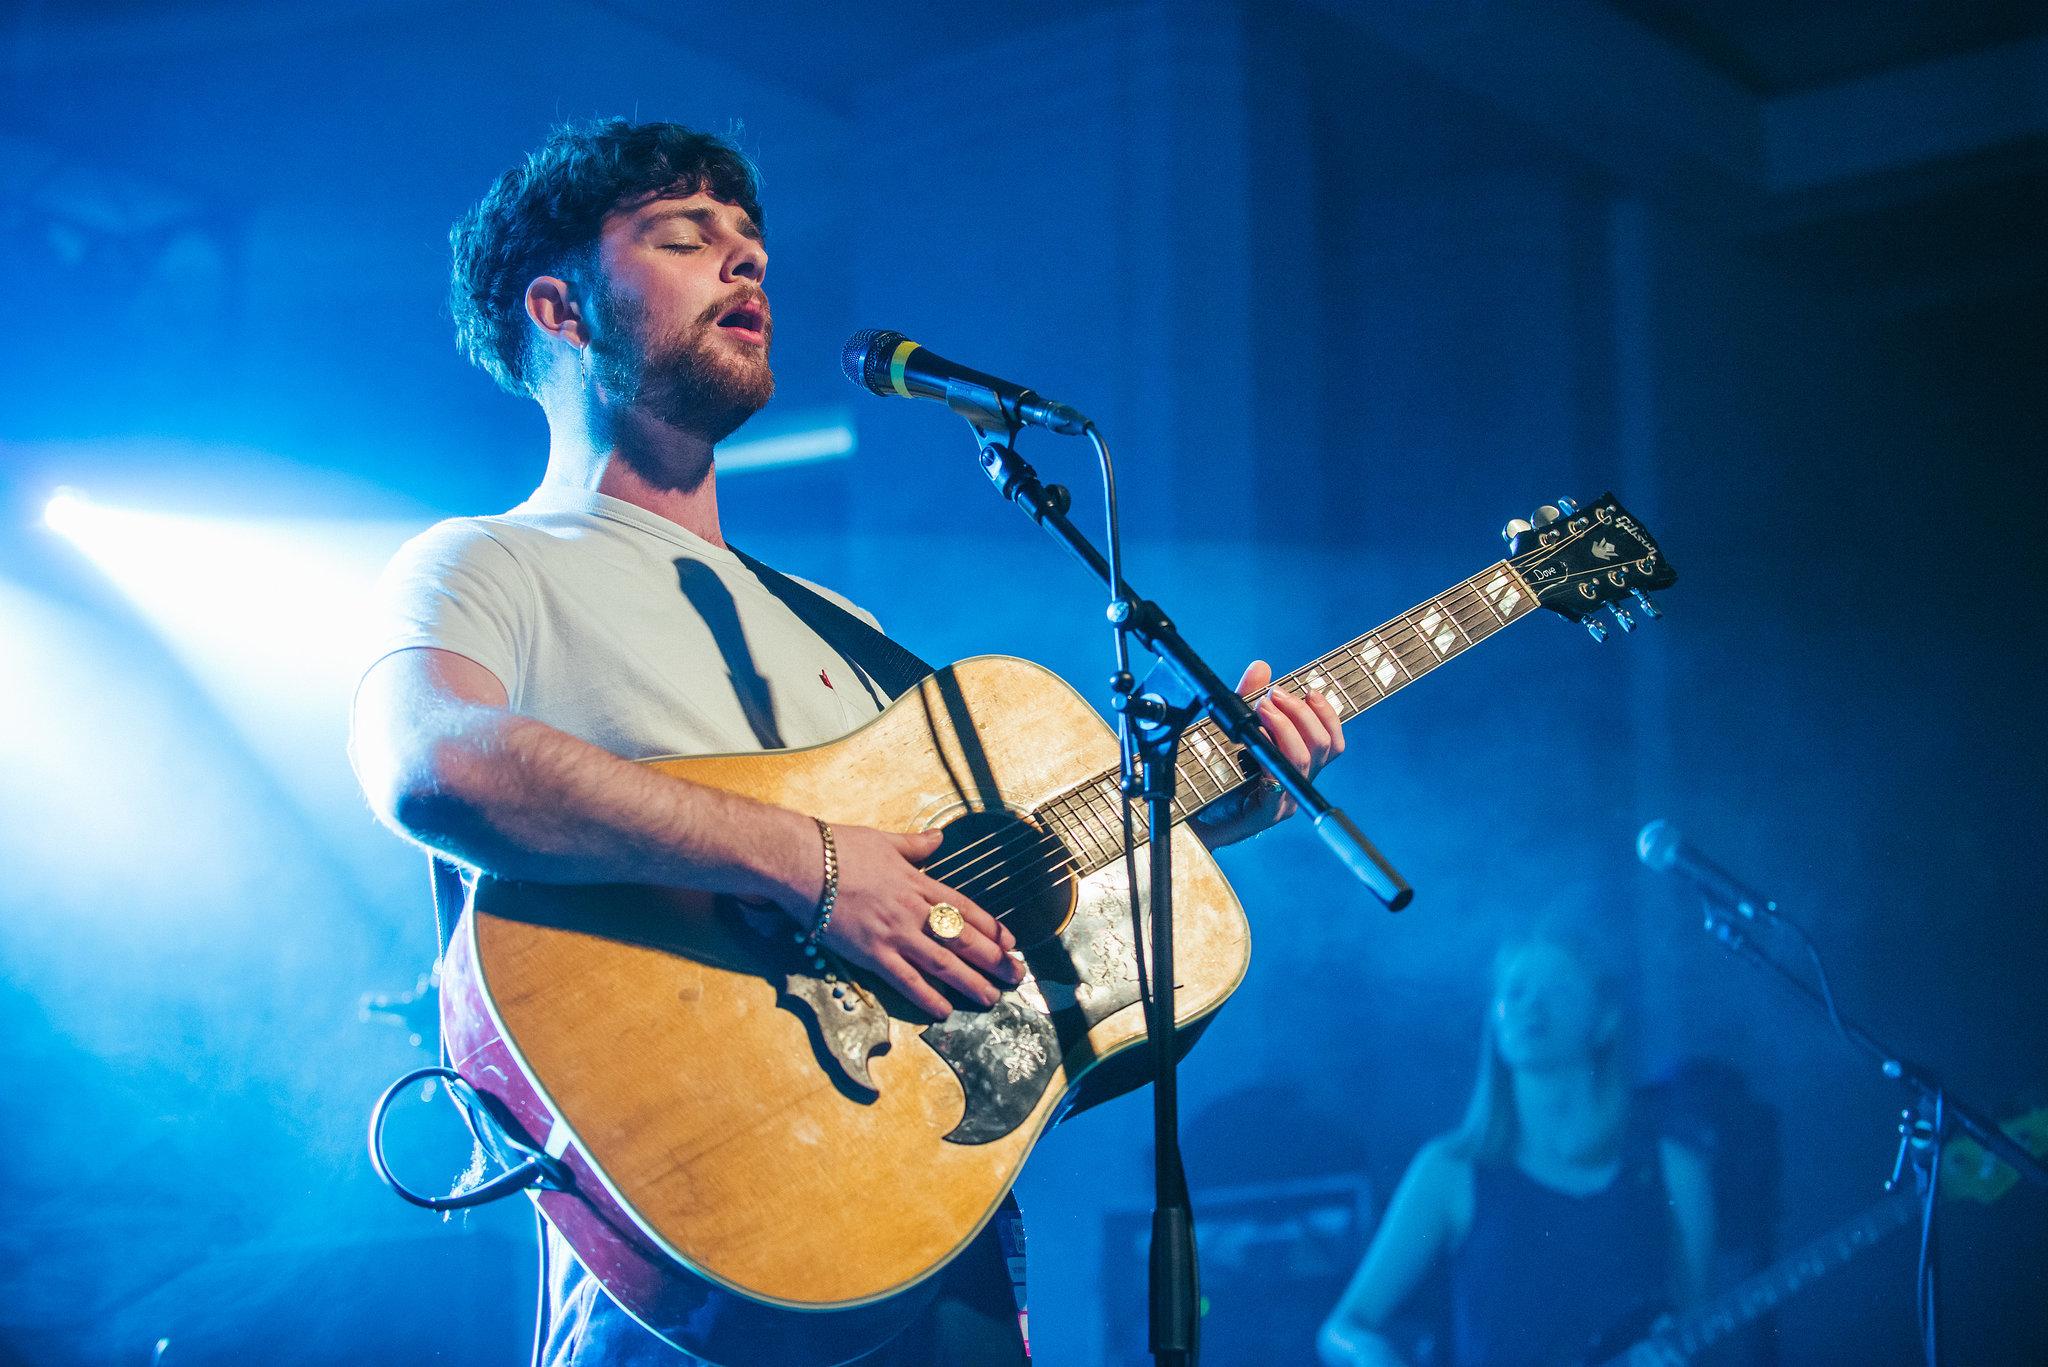 Tom Grennan performs on The Independent stage at Live at Leeds